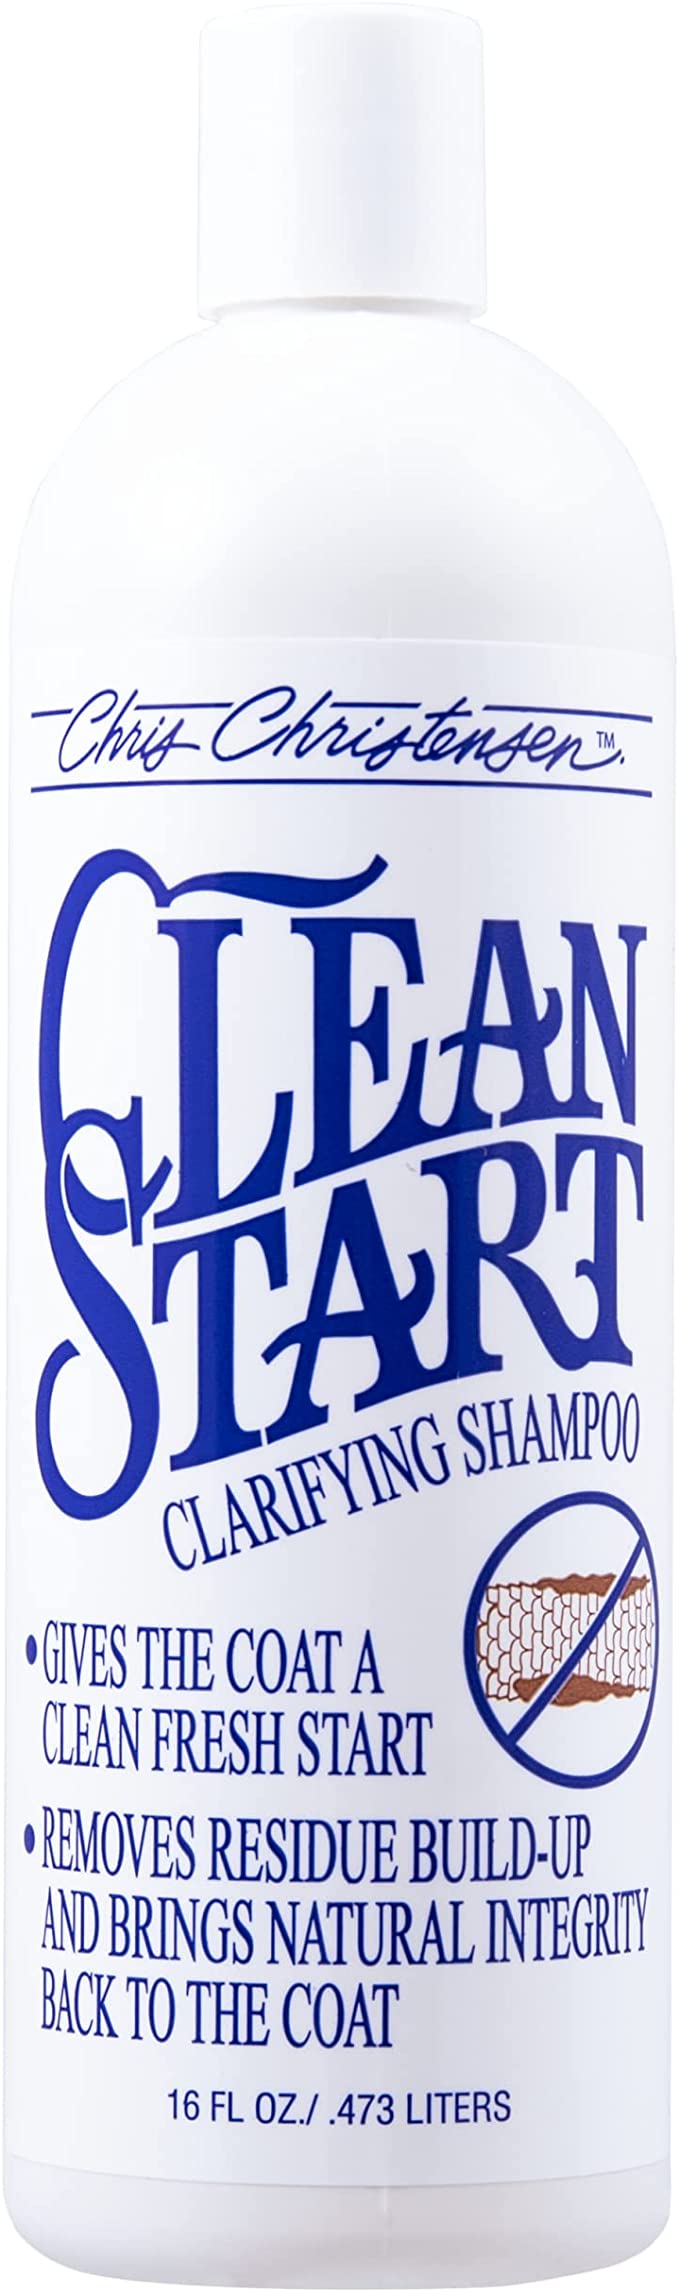 Chris Christensen Clean Start Dog Shampoo, Groom Like a Professional, Pro-Vitamin Deep Cleansing Formula, Preserves Natural Oils, Removes Build Up from Other conditioners, All Coat Types, Made in USA